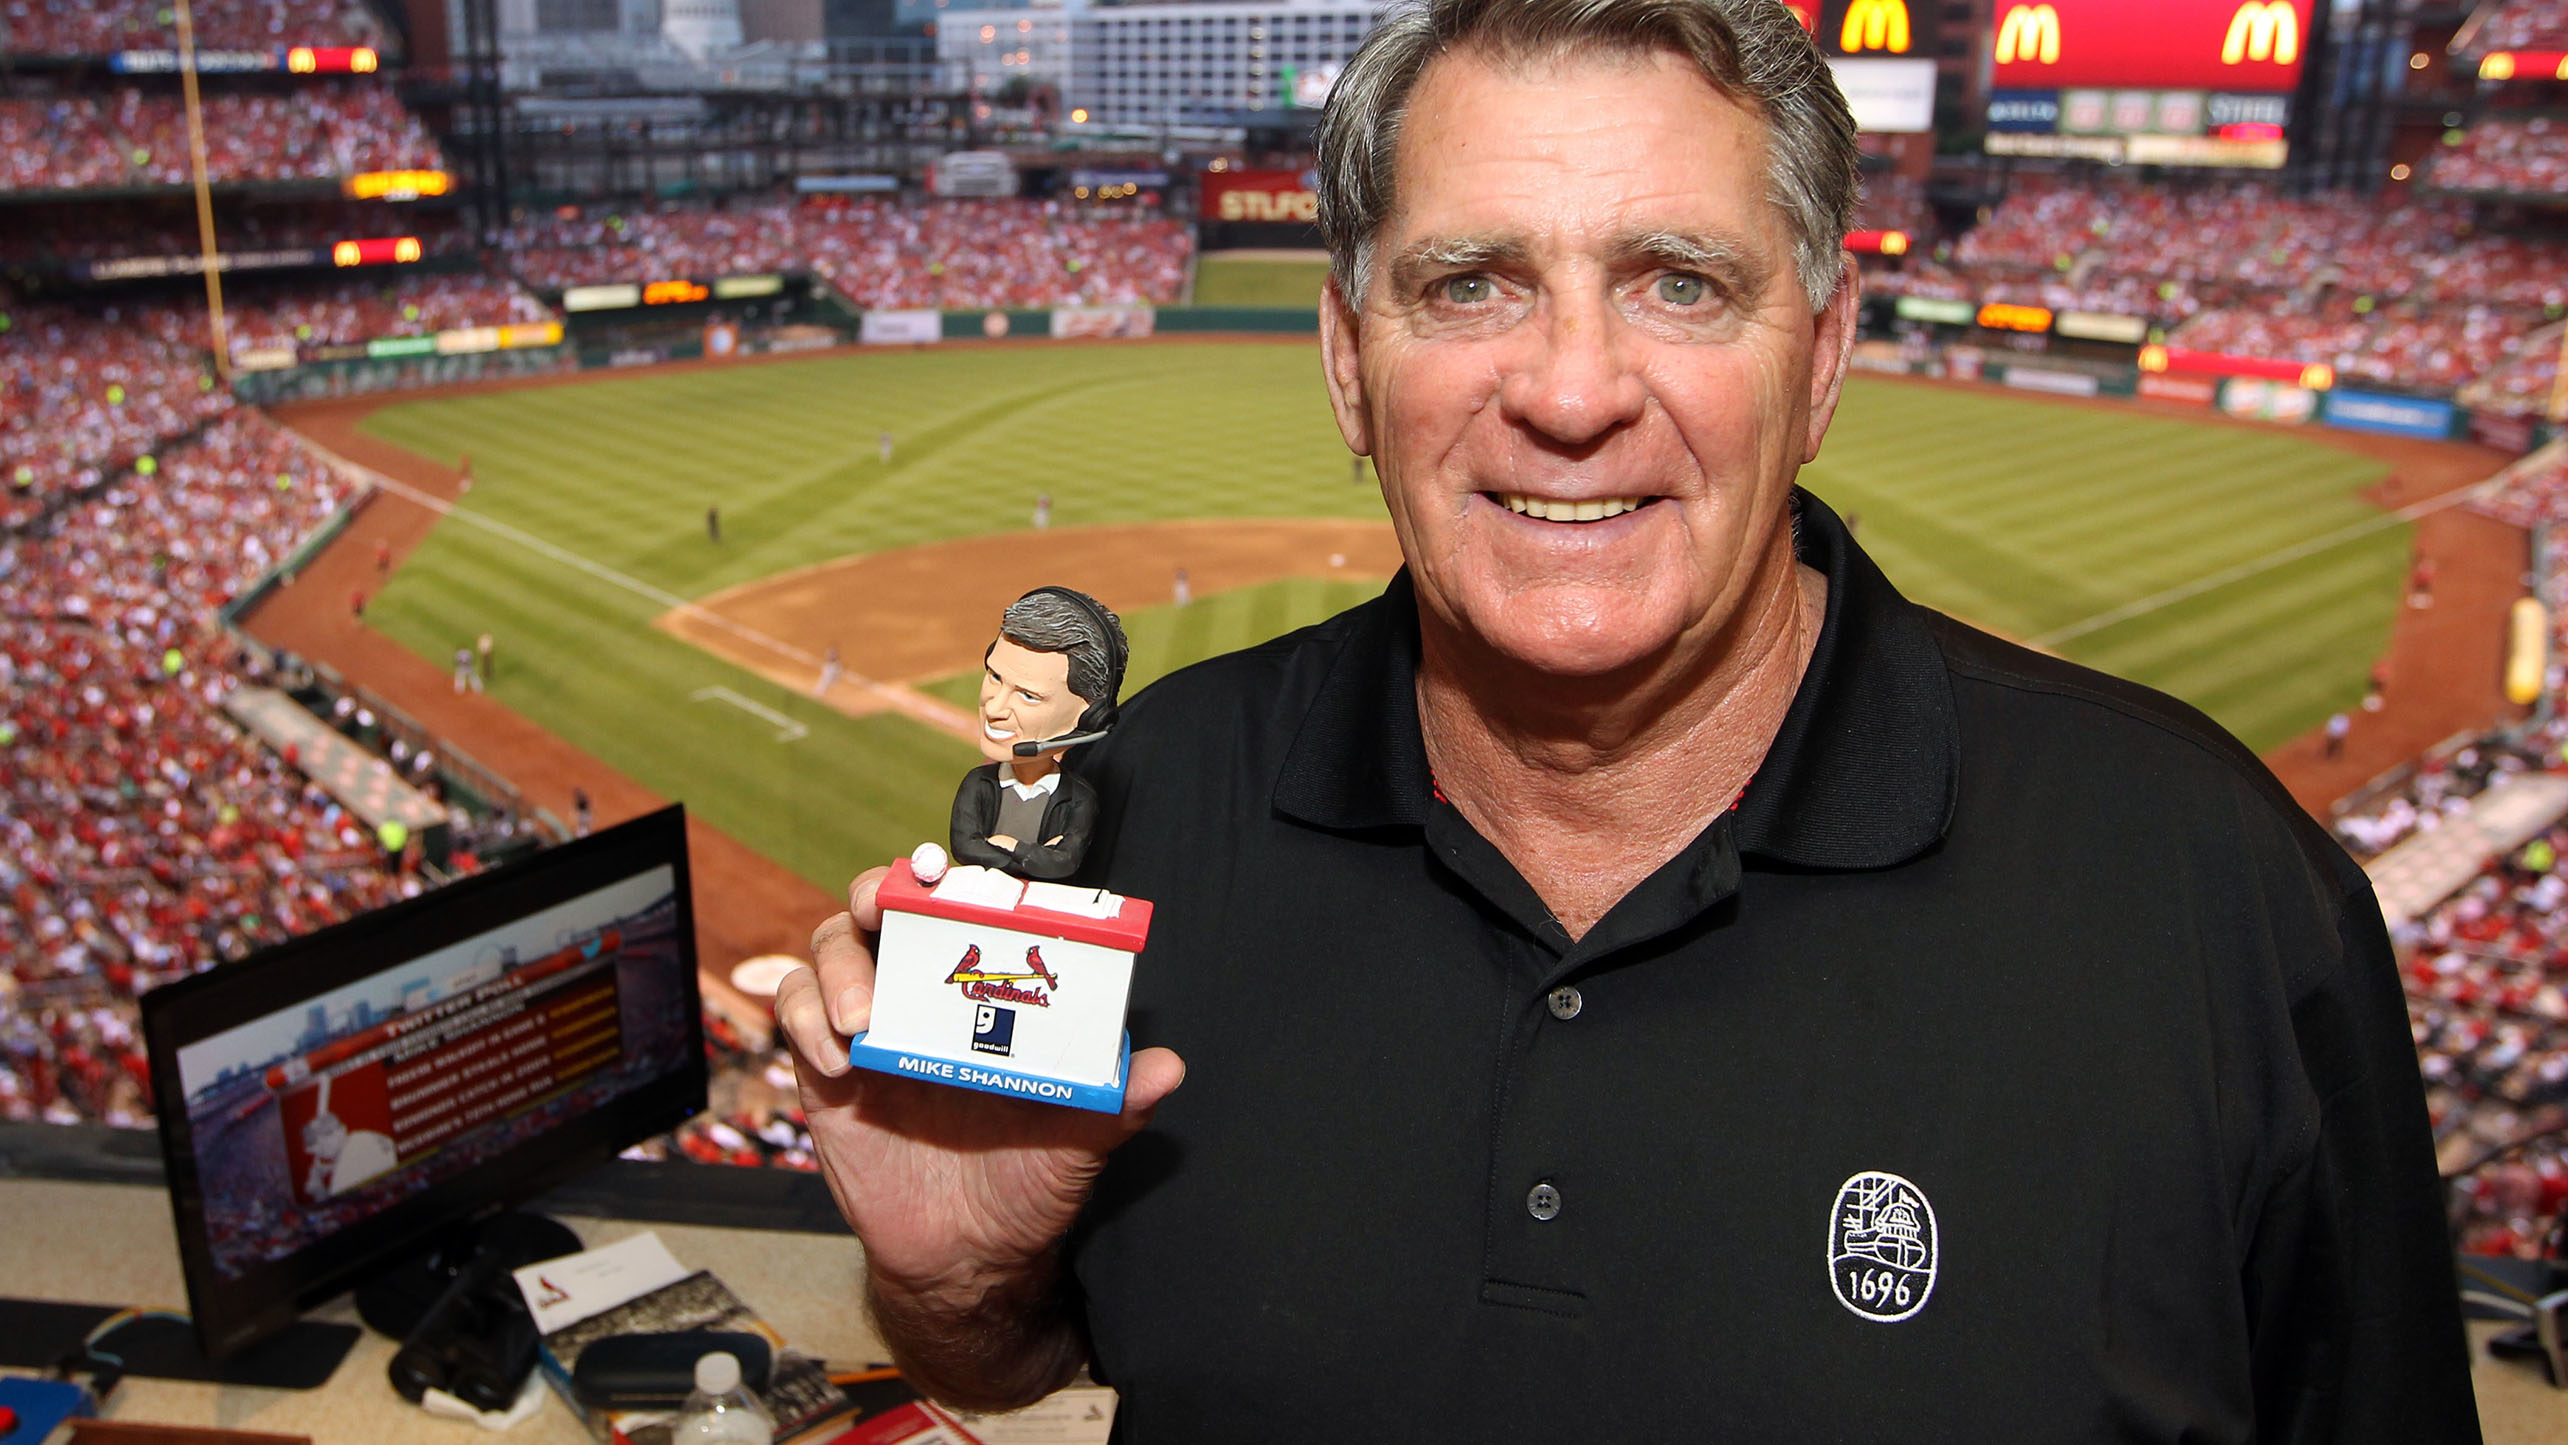 Mike Shannon – Society for American Baseball Research